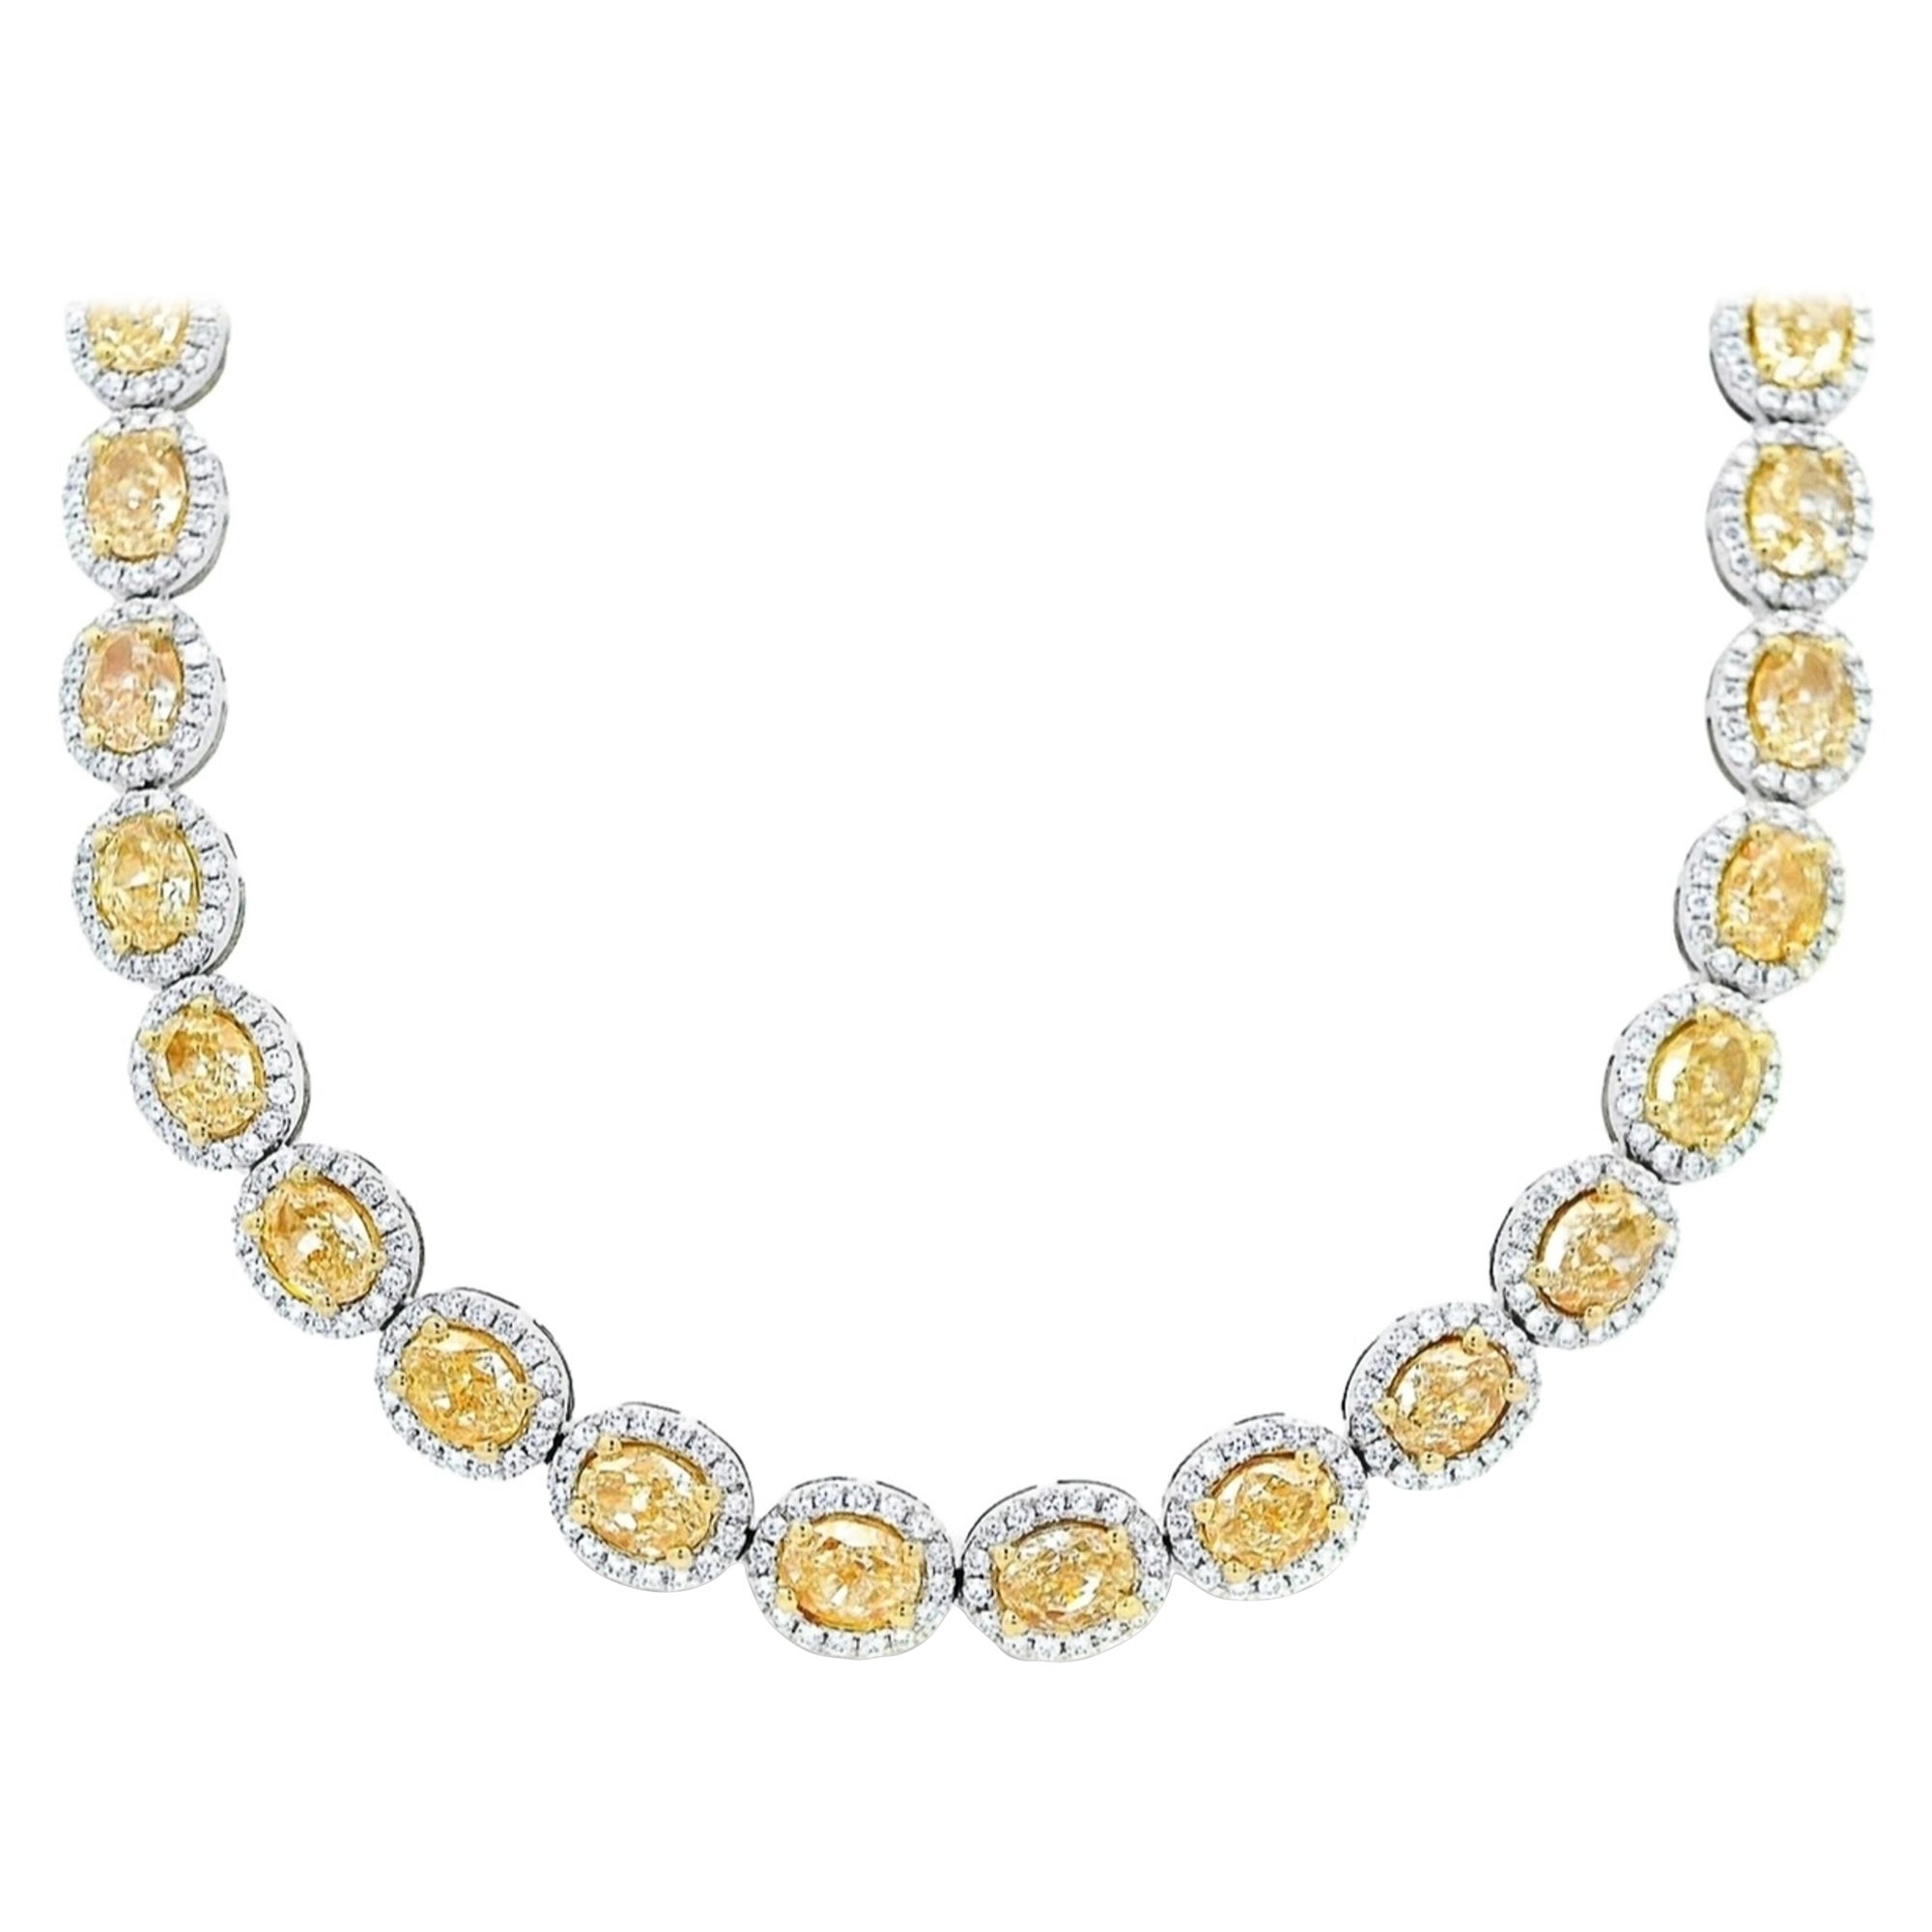 Alexander Beverly Hills 22.37ct Oval Yellow Diamond Necklace with Halo 18k For Sale